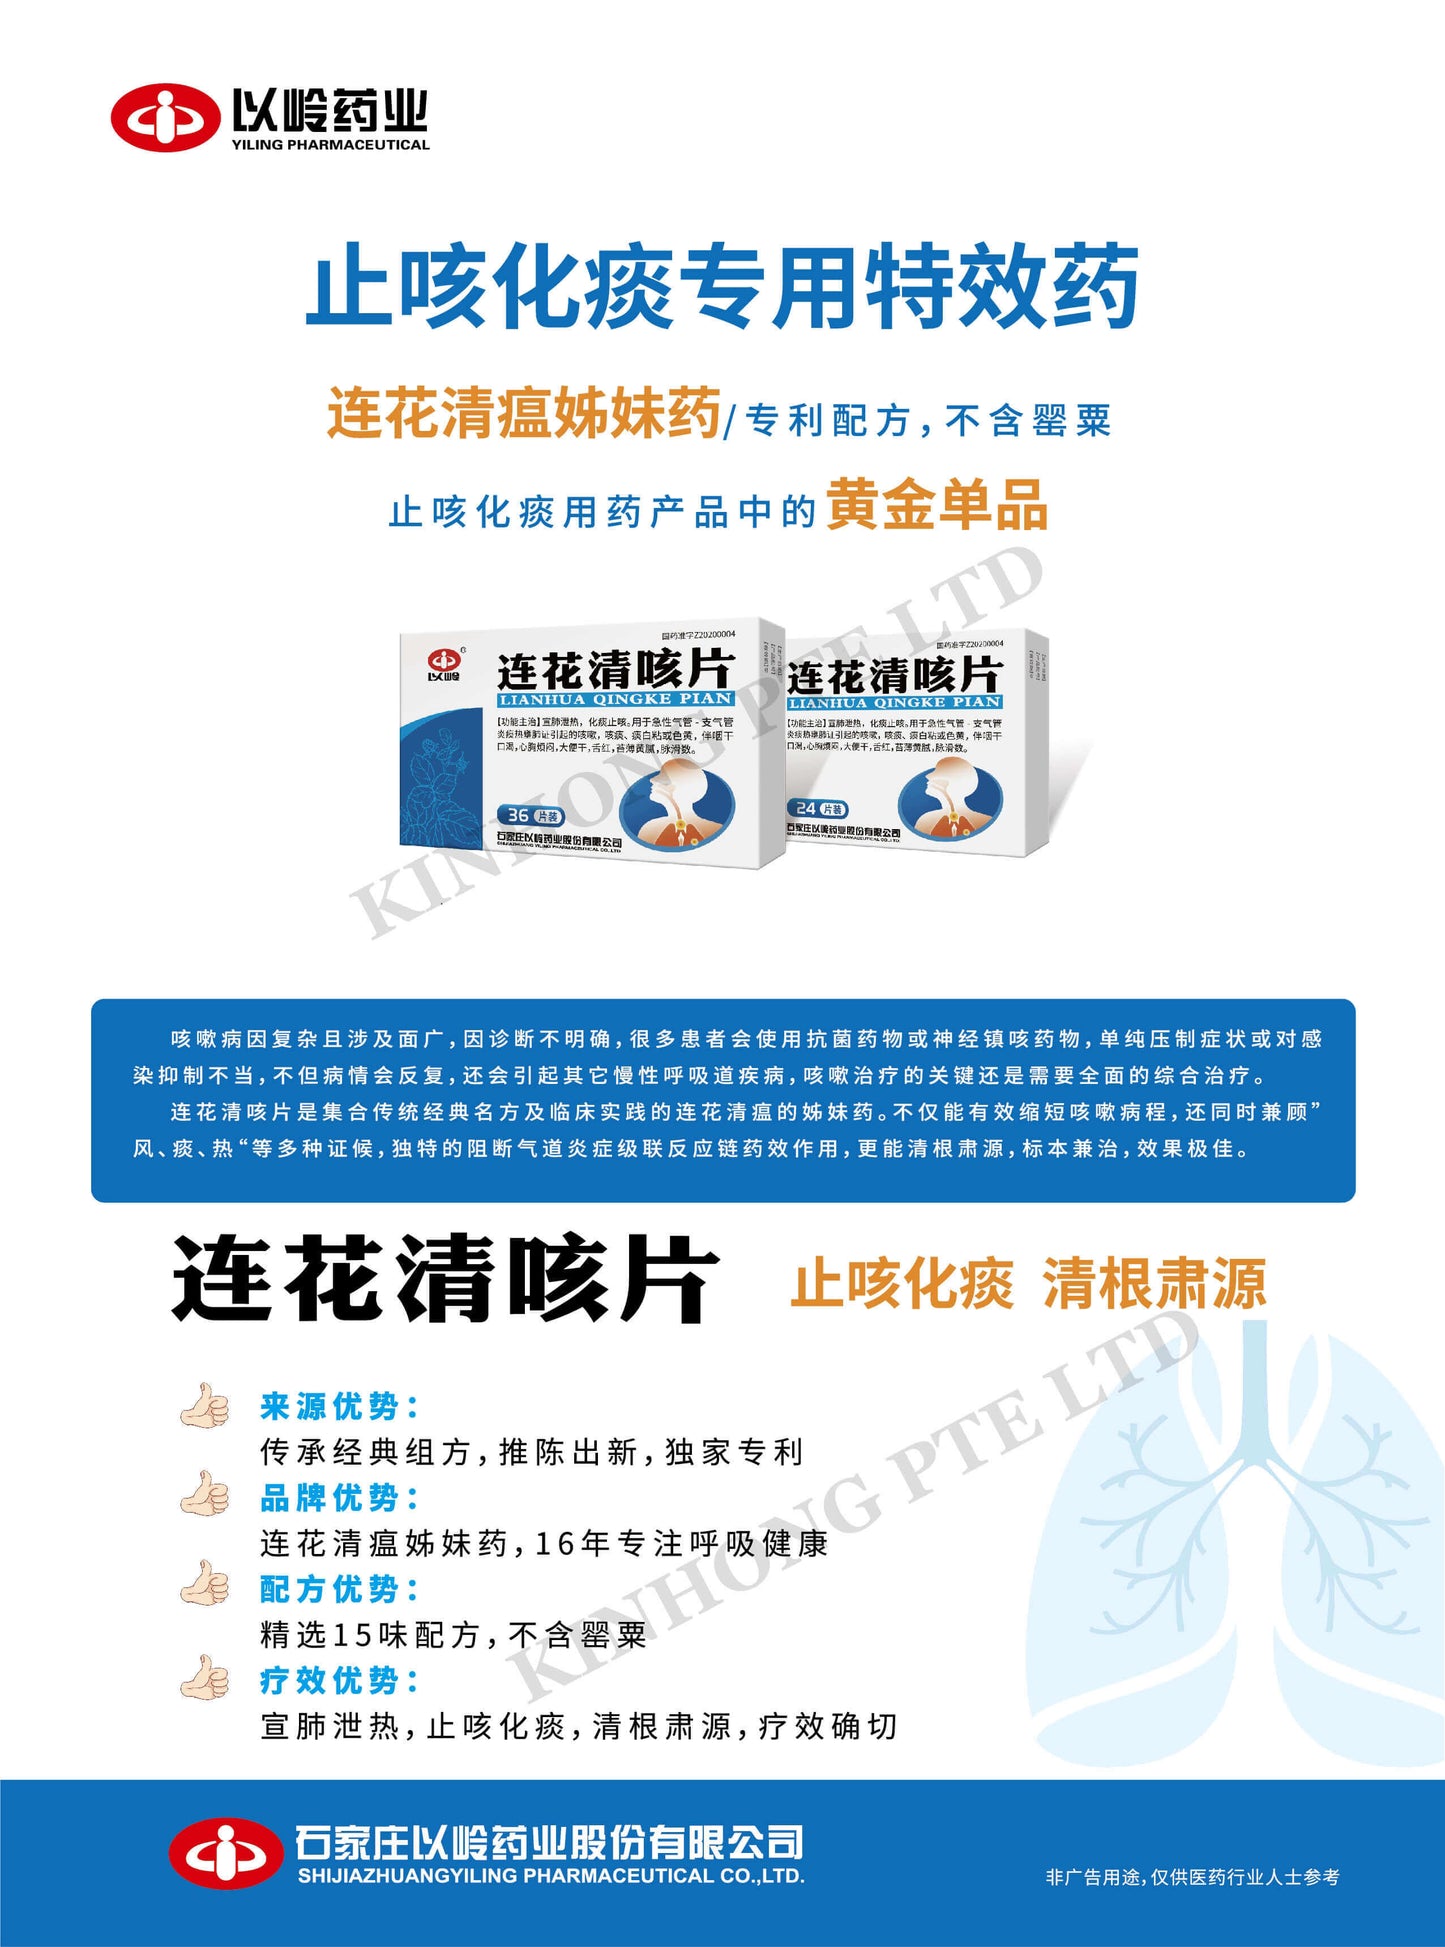 Chinese medicine for coughing and phlegm, tcm cough remedy, chinese cough medicine near me, lianhua medicine for cough, chinese cough pills, tcm cough medicine, cough medicine in Singapore